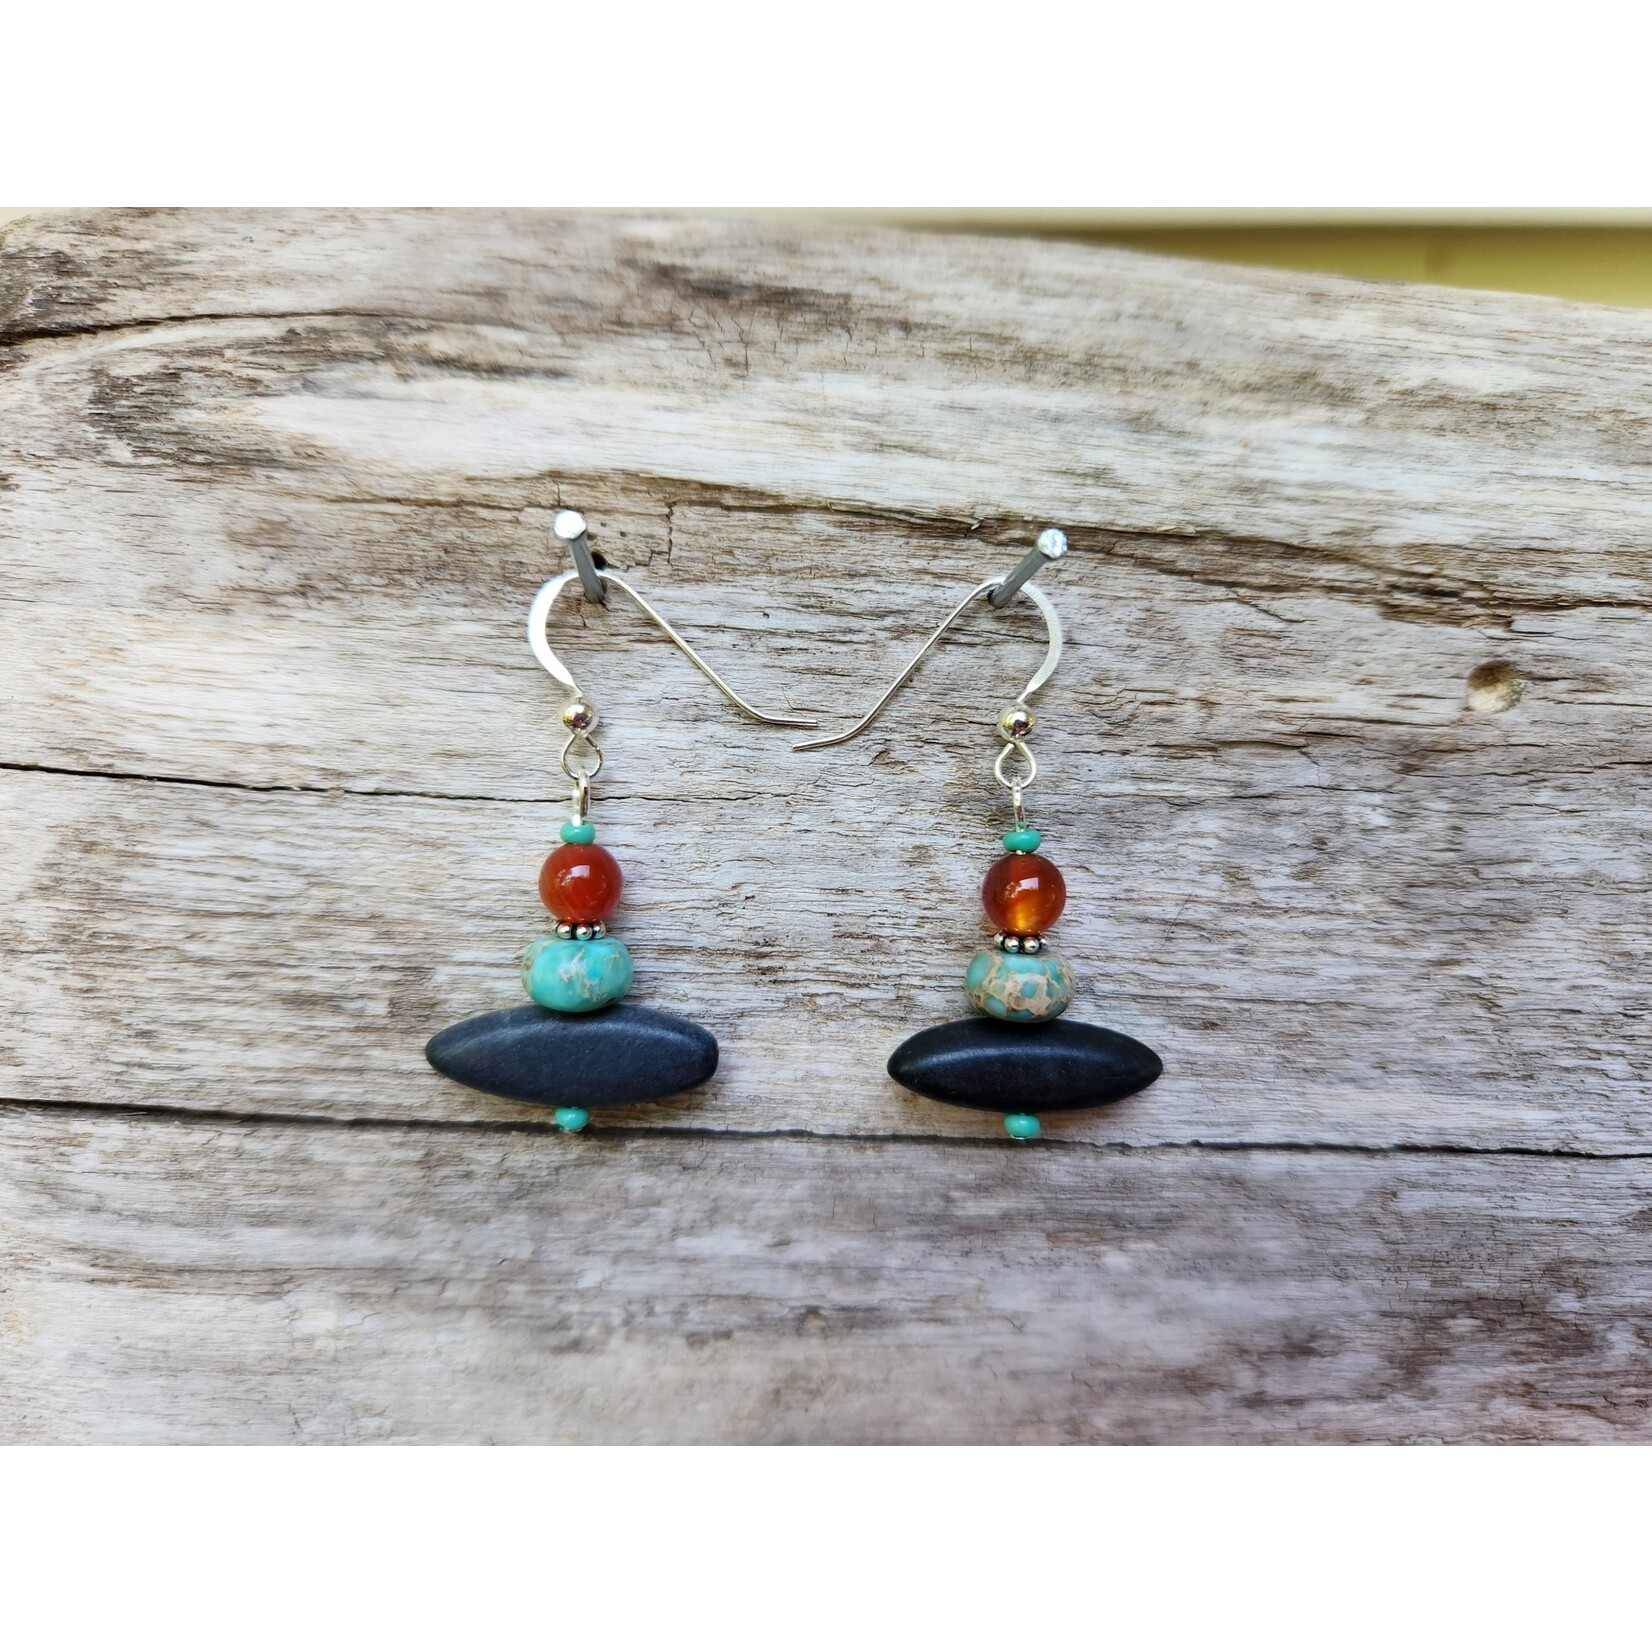 HB Designs Black stone-turq jasper and red earrings, Sterling Silver ear wires